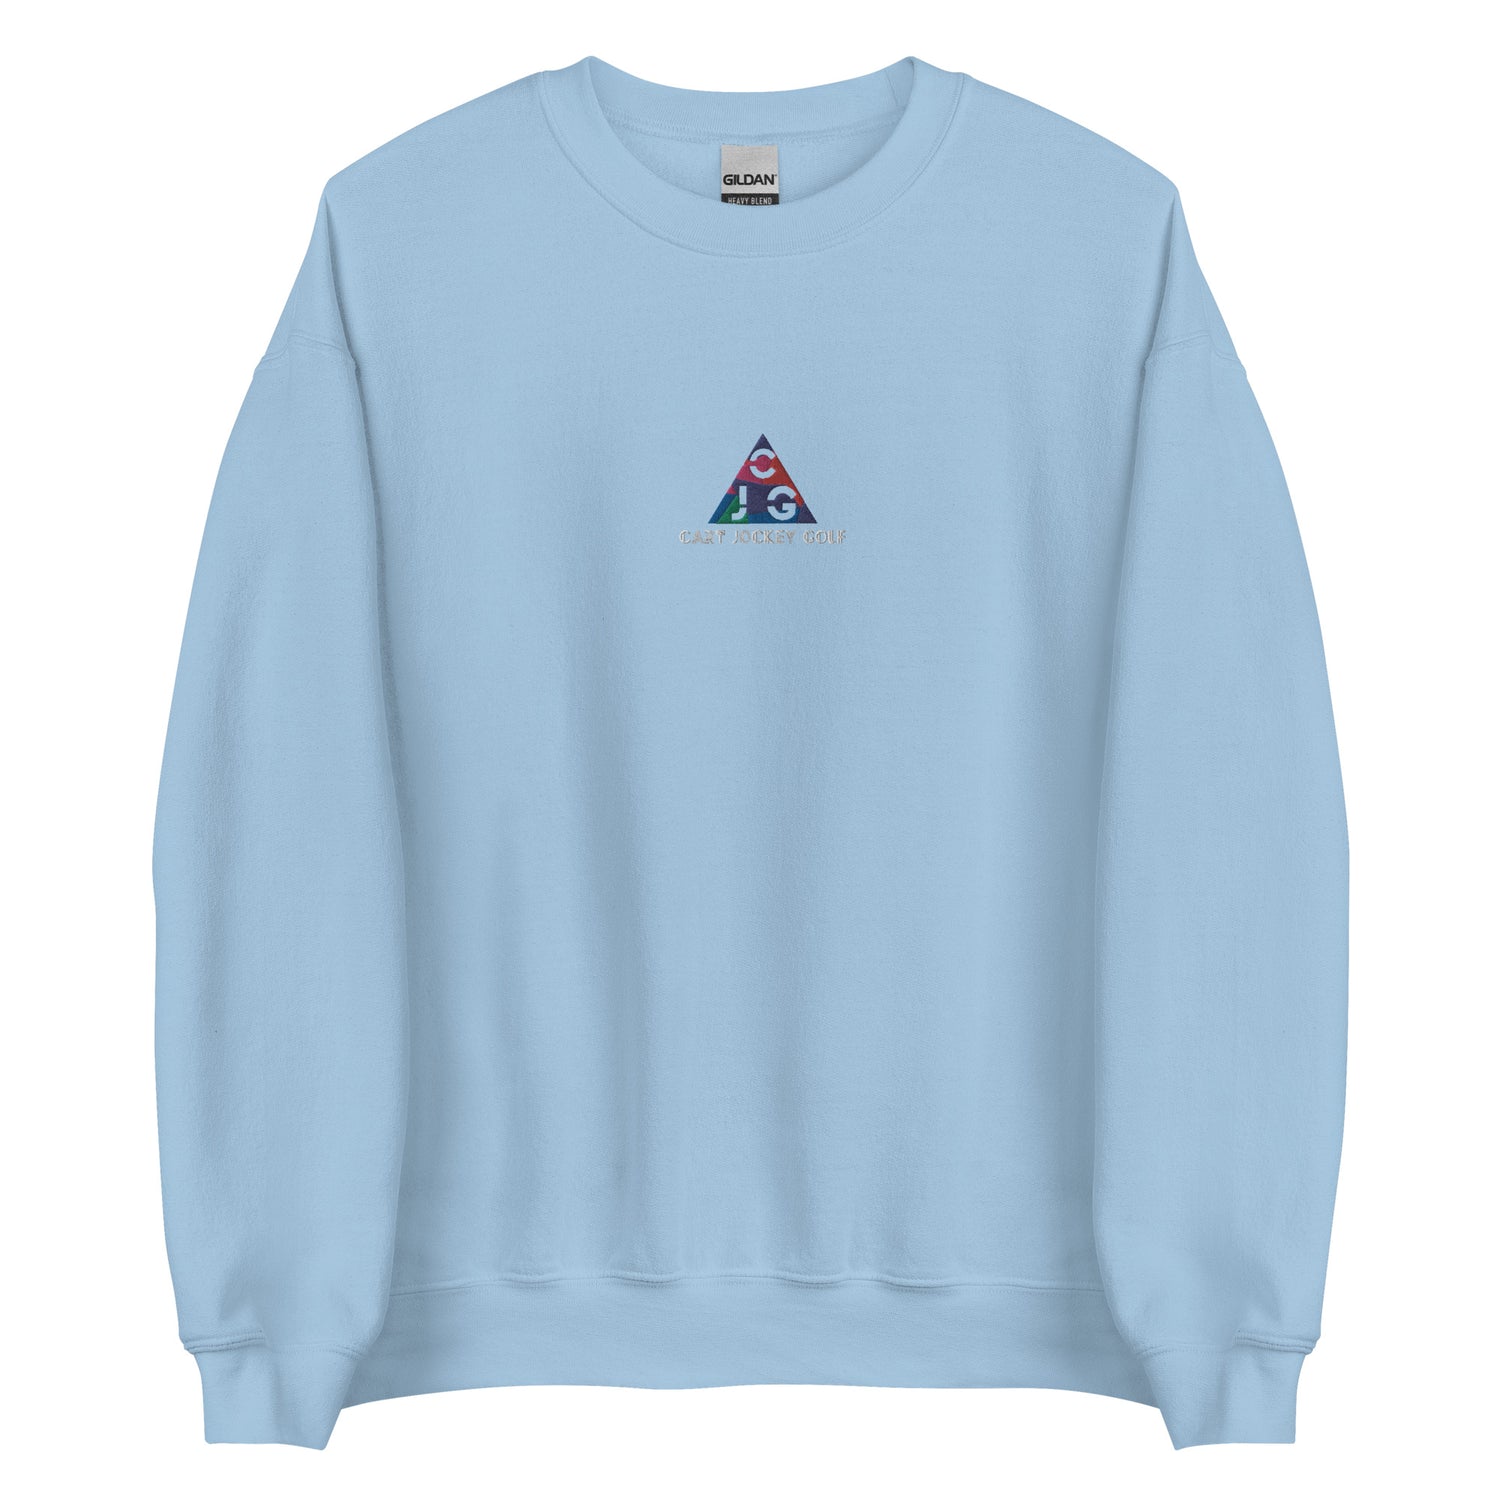 a light blue Triangle Embroidered Crewneck sweatshirt with Cart Jockey Golf embroidered on it.